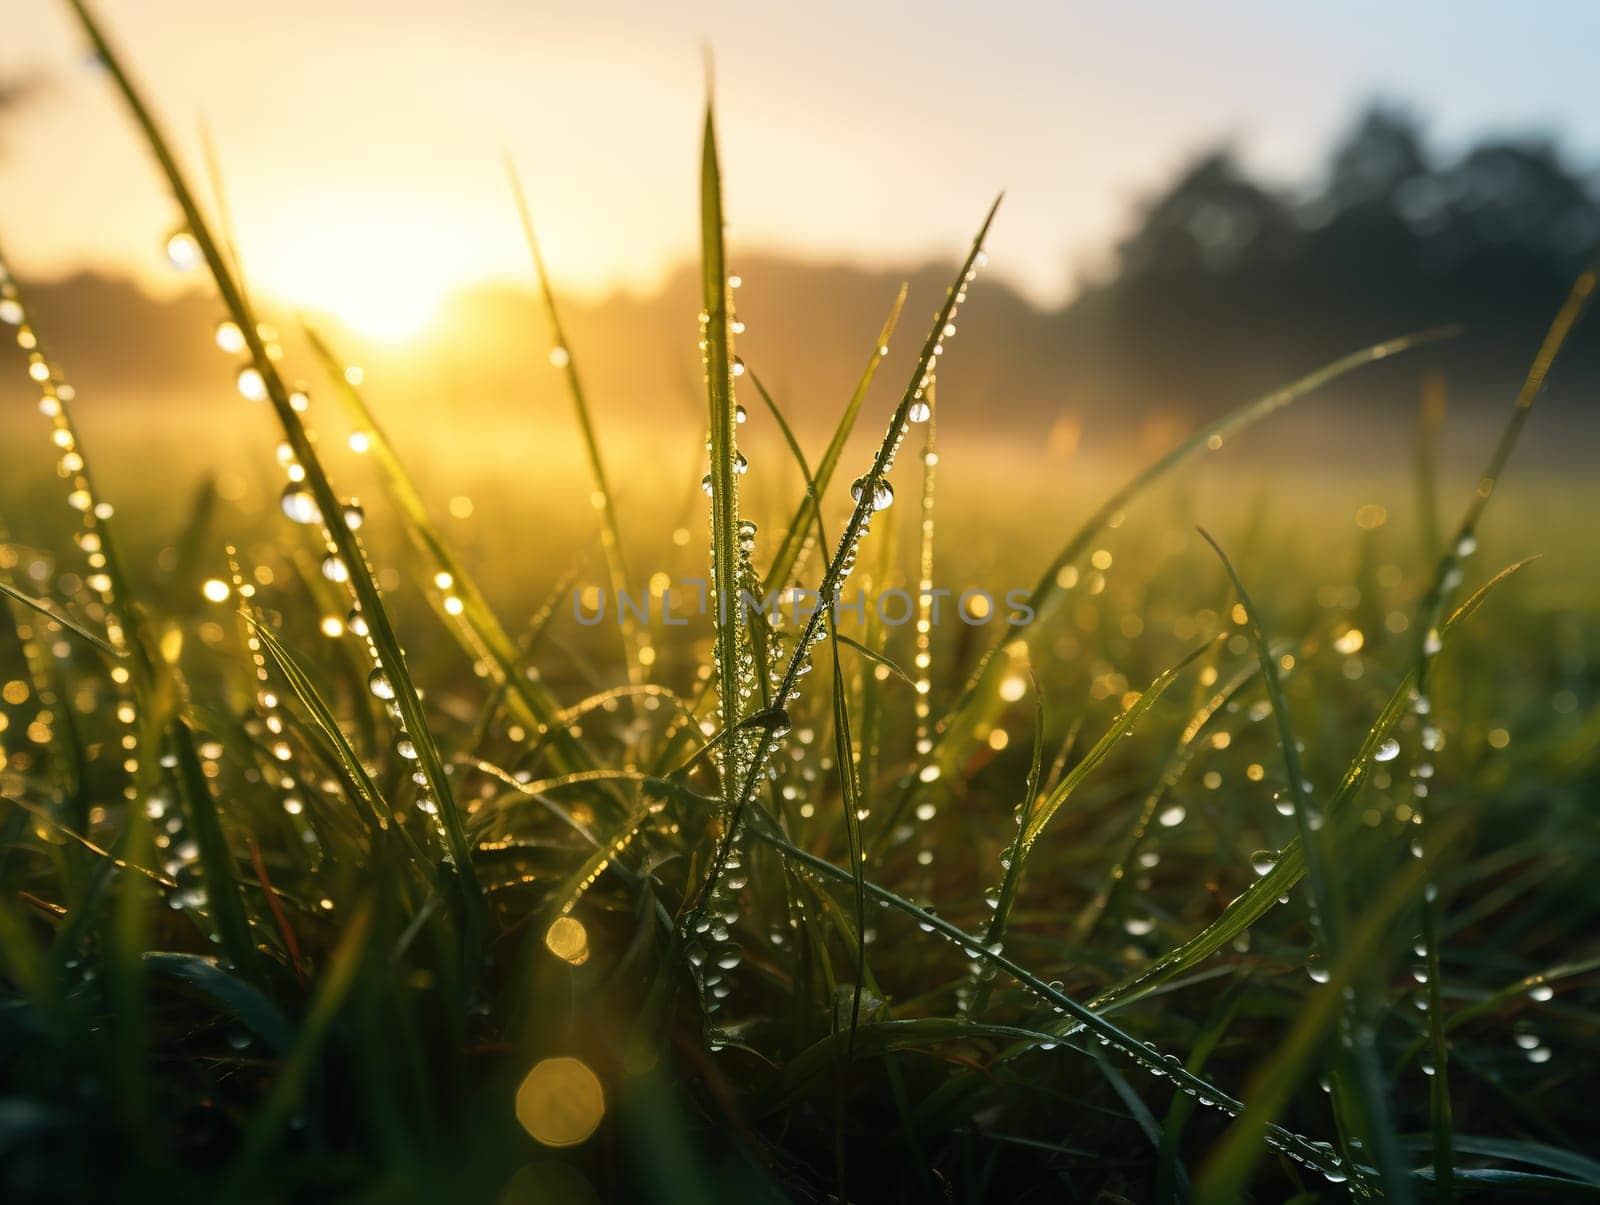 Dewy grass during lovely summer sunrise, nature concept by Kadula